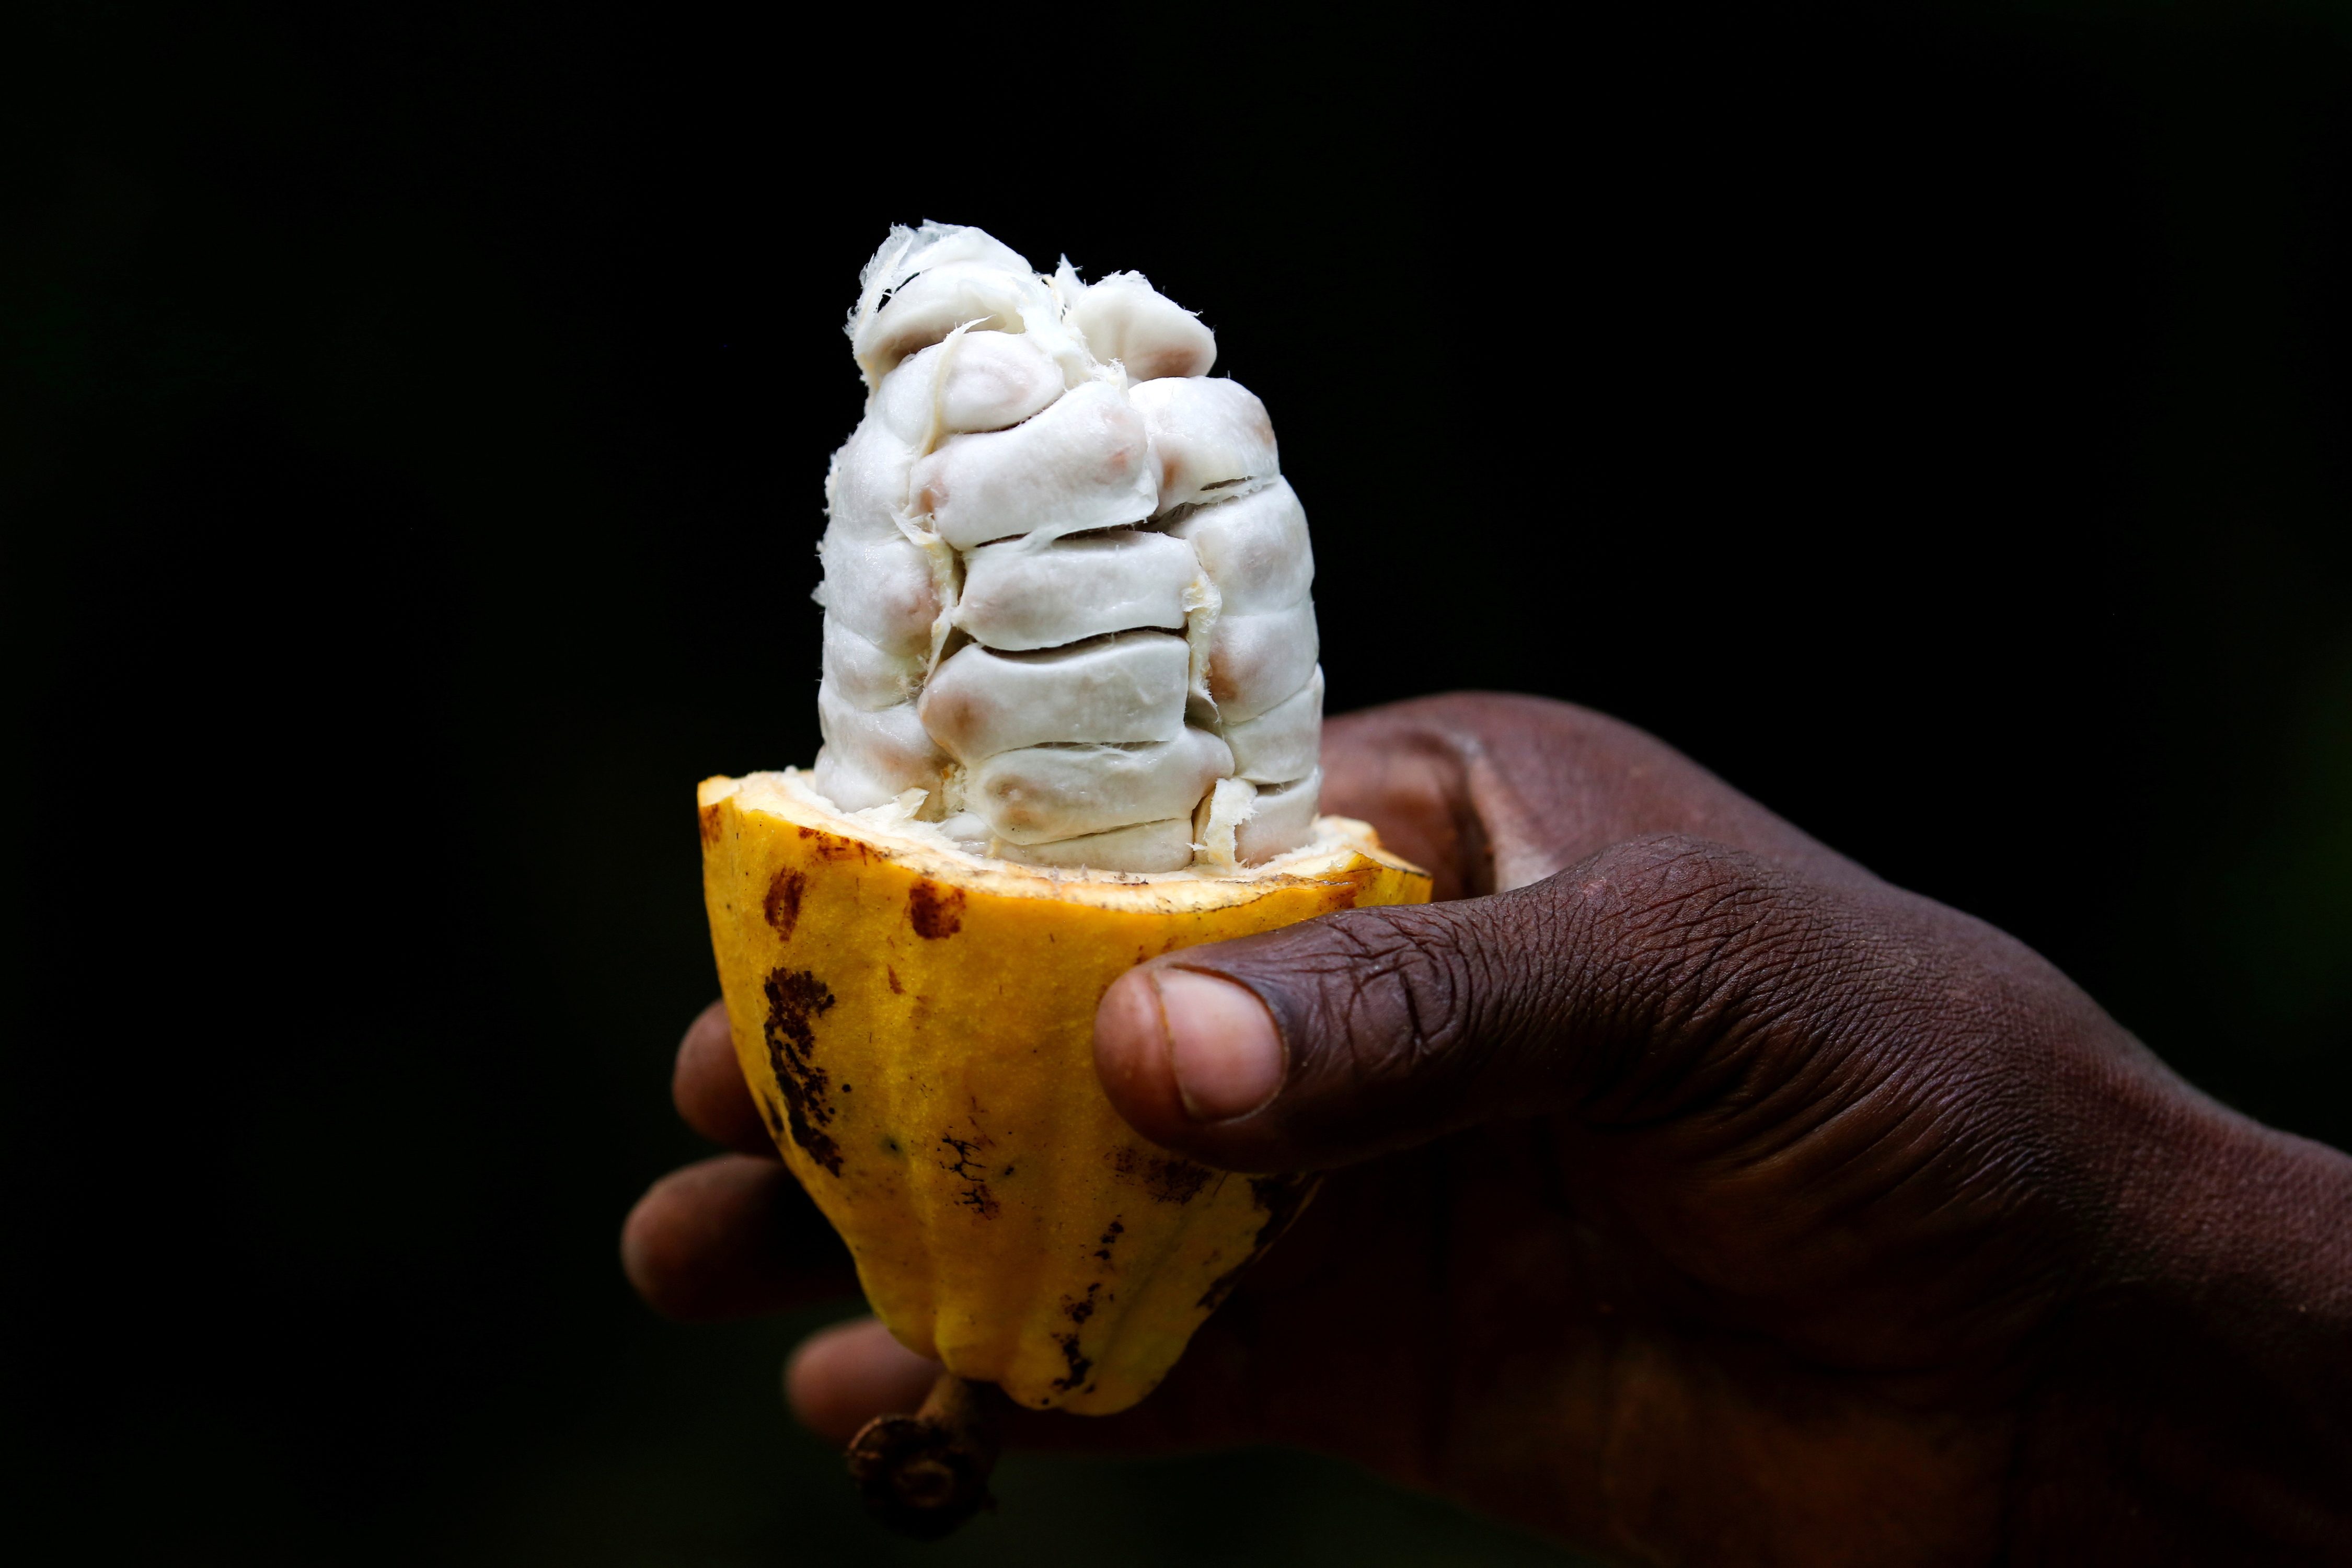 Chocolate makers trace more cocoa beans to ensure ethical sourcing